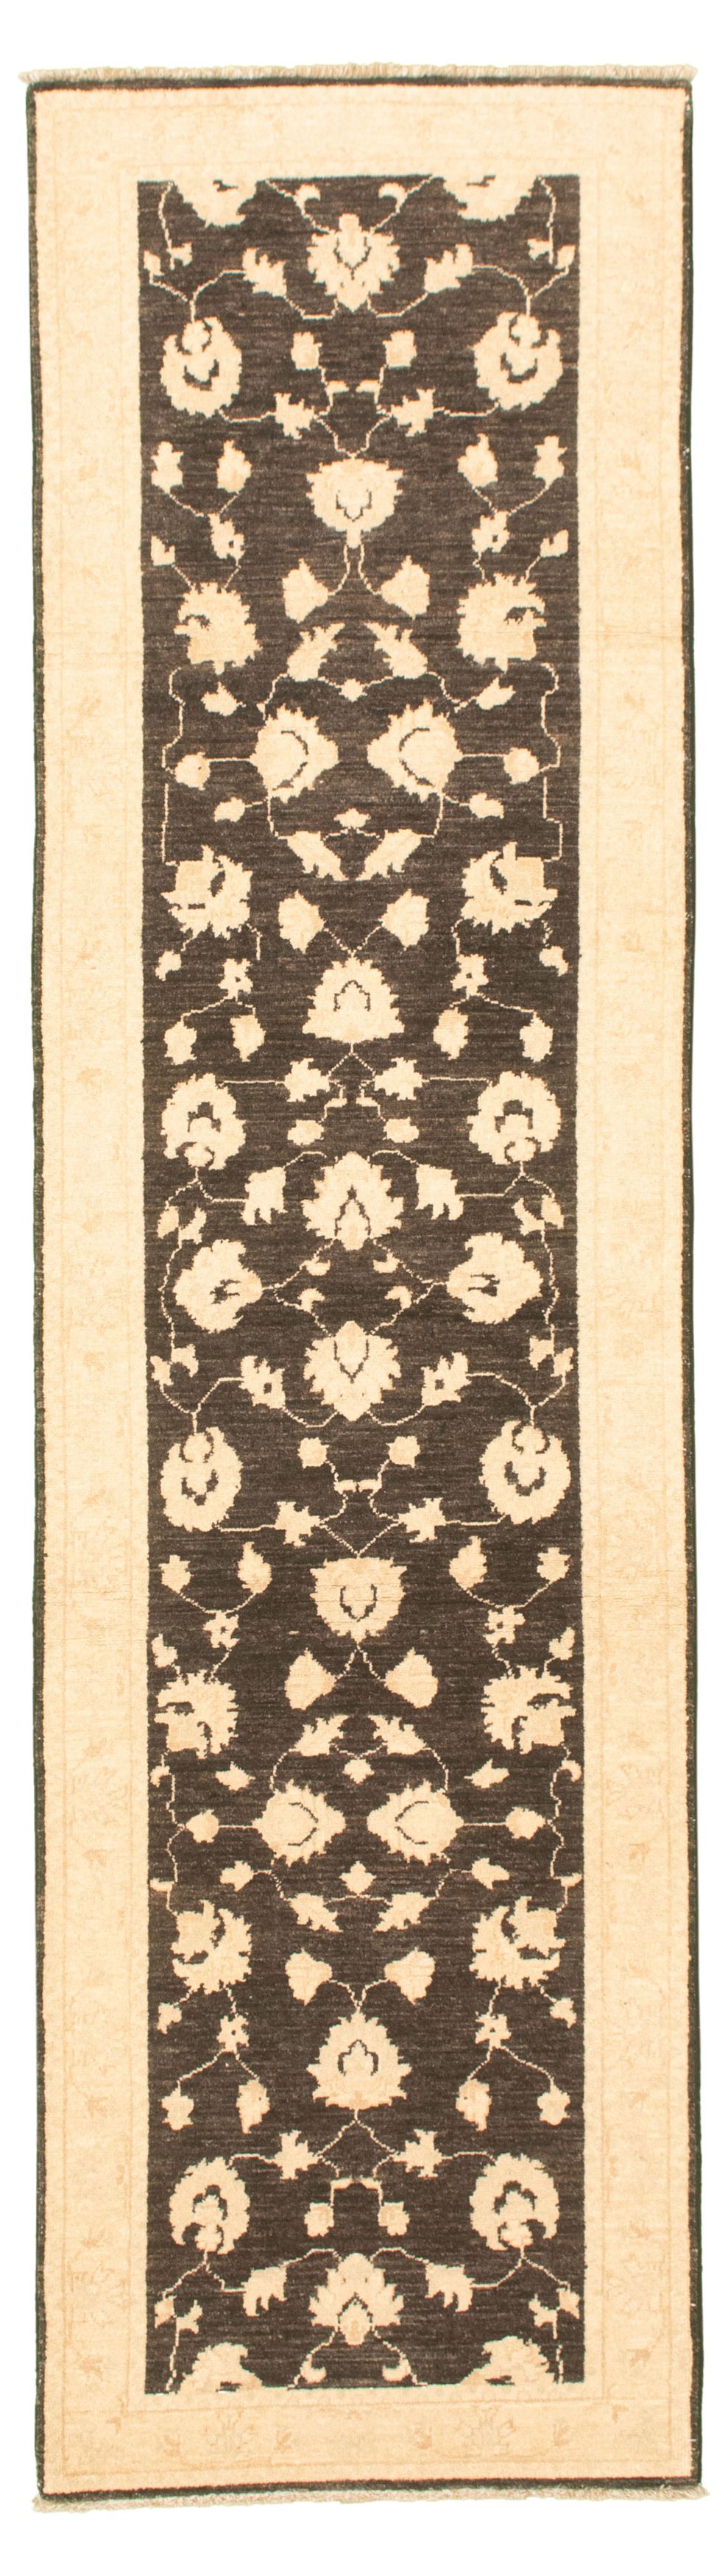 Hand-knotted Chobi Finest Black Wool Rug 2'8" x 9'8" Size: 2'8" x 9'8"  